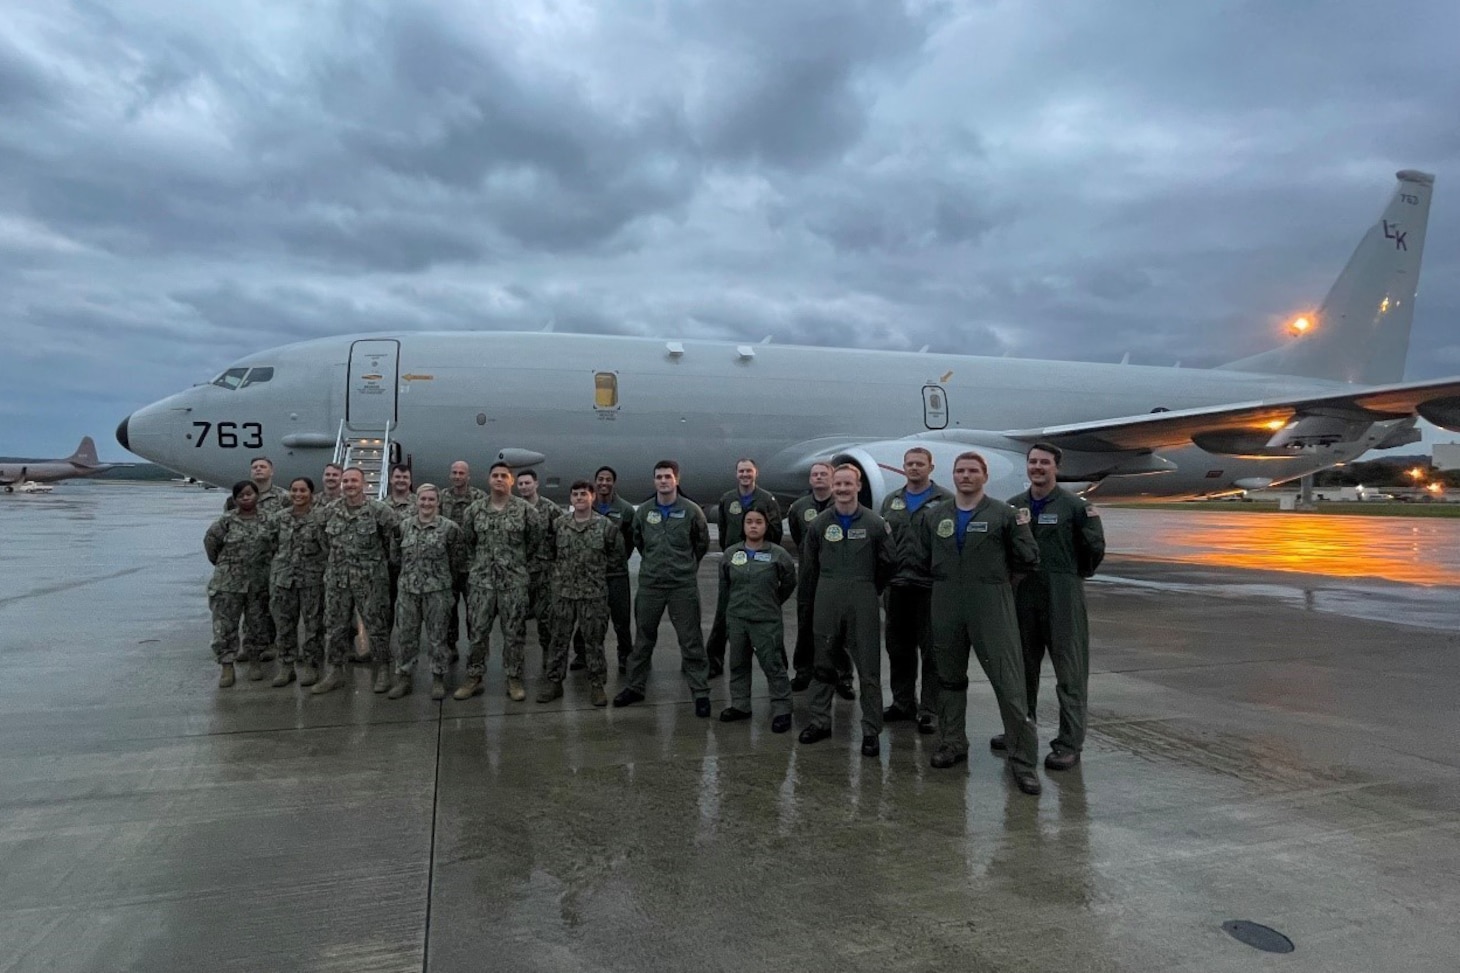 ANDERSEN AIR FORCE BASE, Guam (Nov. 13, 2021) Aircrew, maintenance crew and combat support crew pose in front of a P-8A Poseidon following the completion of a successful search and rescue detachment. VP-26 conducts maritime patrol and reconnaissance as well as theater outreach operations as part of a rotational deployment to the U.S. 7th Fleet area of operations. (U.S. Navy photo by Lt. Mitchell Chen)